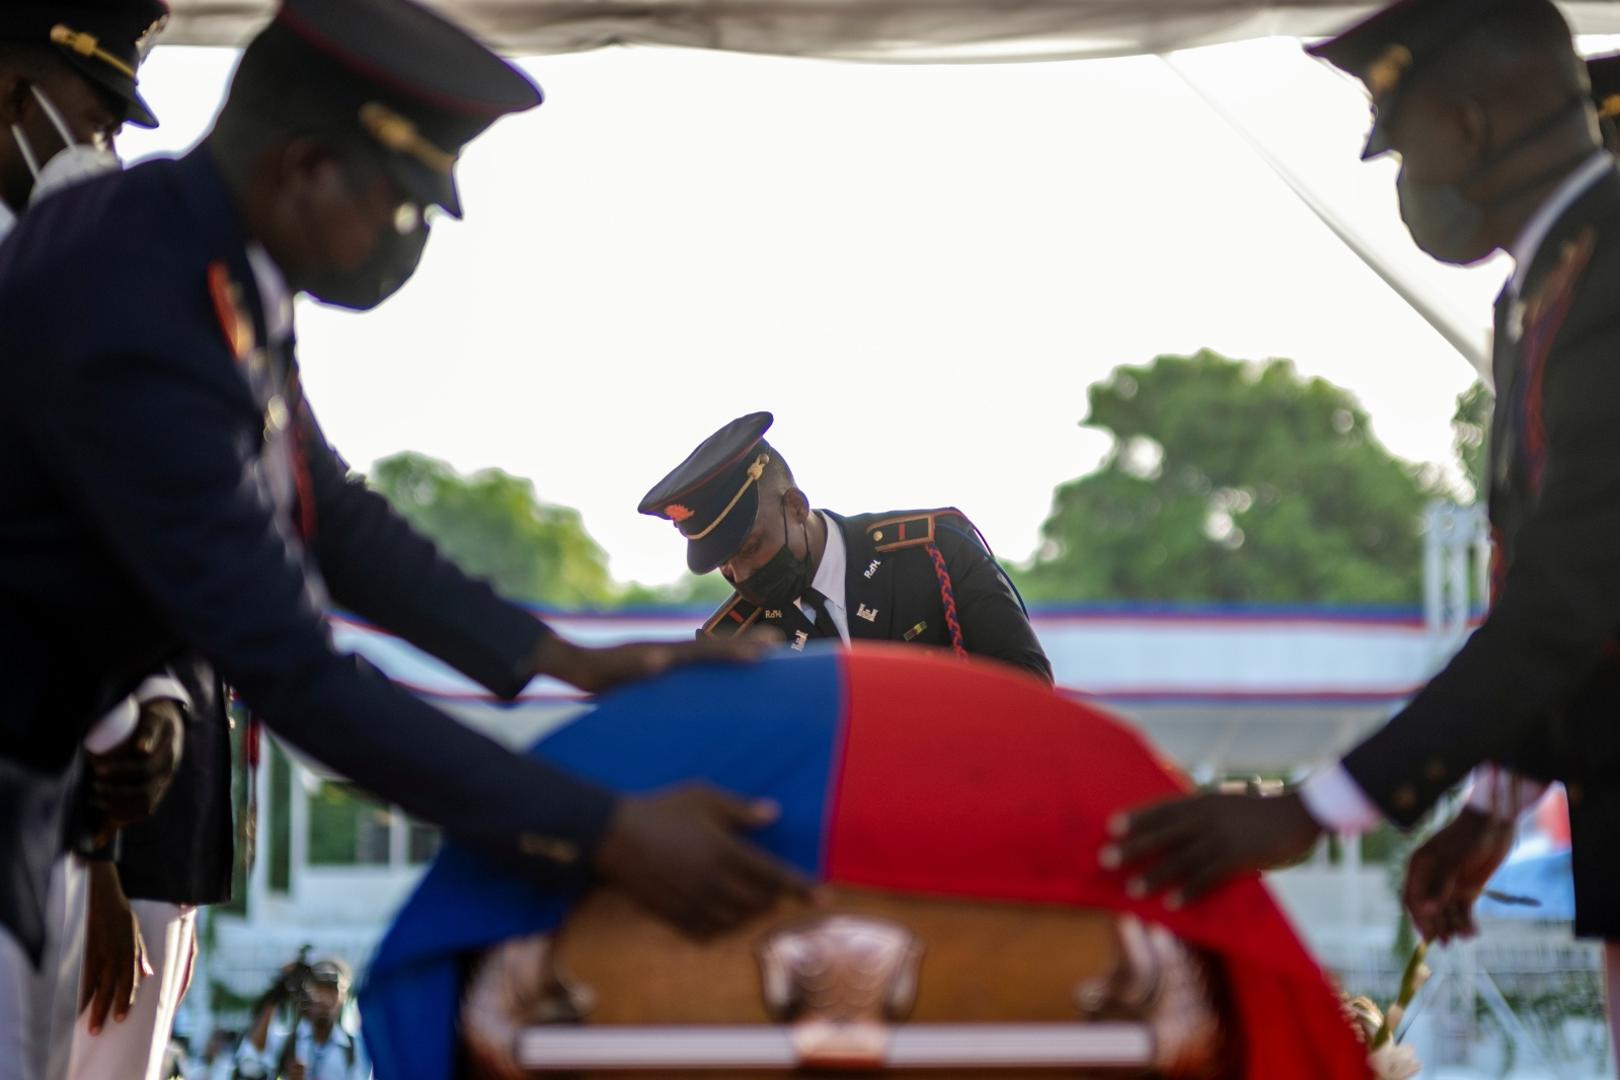 Haiti holds funeral for assassinated President Jovenel Moise in Cap-Haitien Presidential honor guards place a national flag over the coffin of late Haitian President Jovenel Moise, who was shot dead earlier this month, during the funeral at his family home in Cap-Haitien, Haiti, July 23, 2021. REUTERS/Ricardo Arduengo RICARDO ARDUENGO